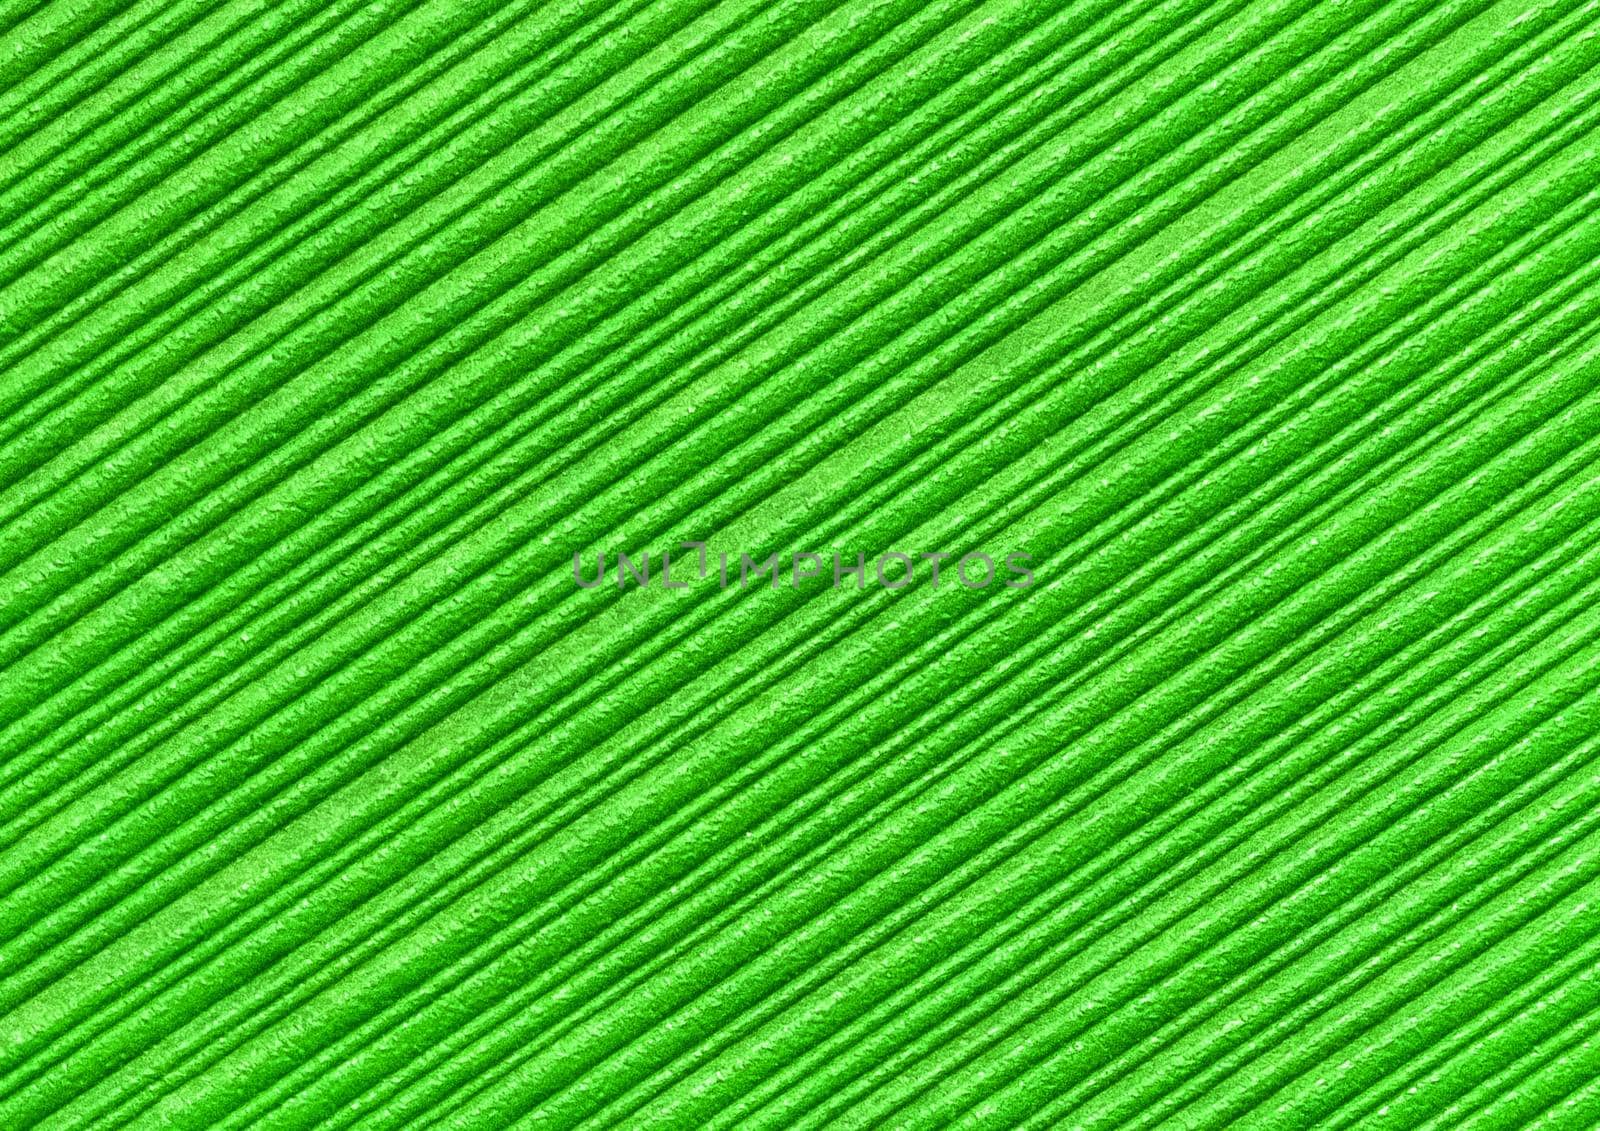 Green abstract striped pattern wallpaper background, paper texture with diagonal lines by AYDO8